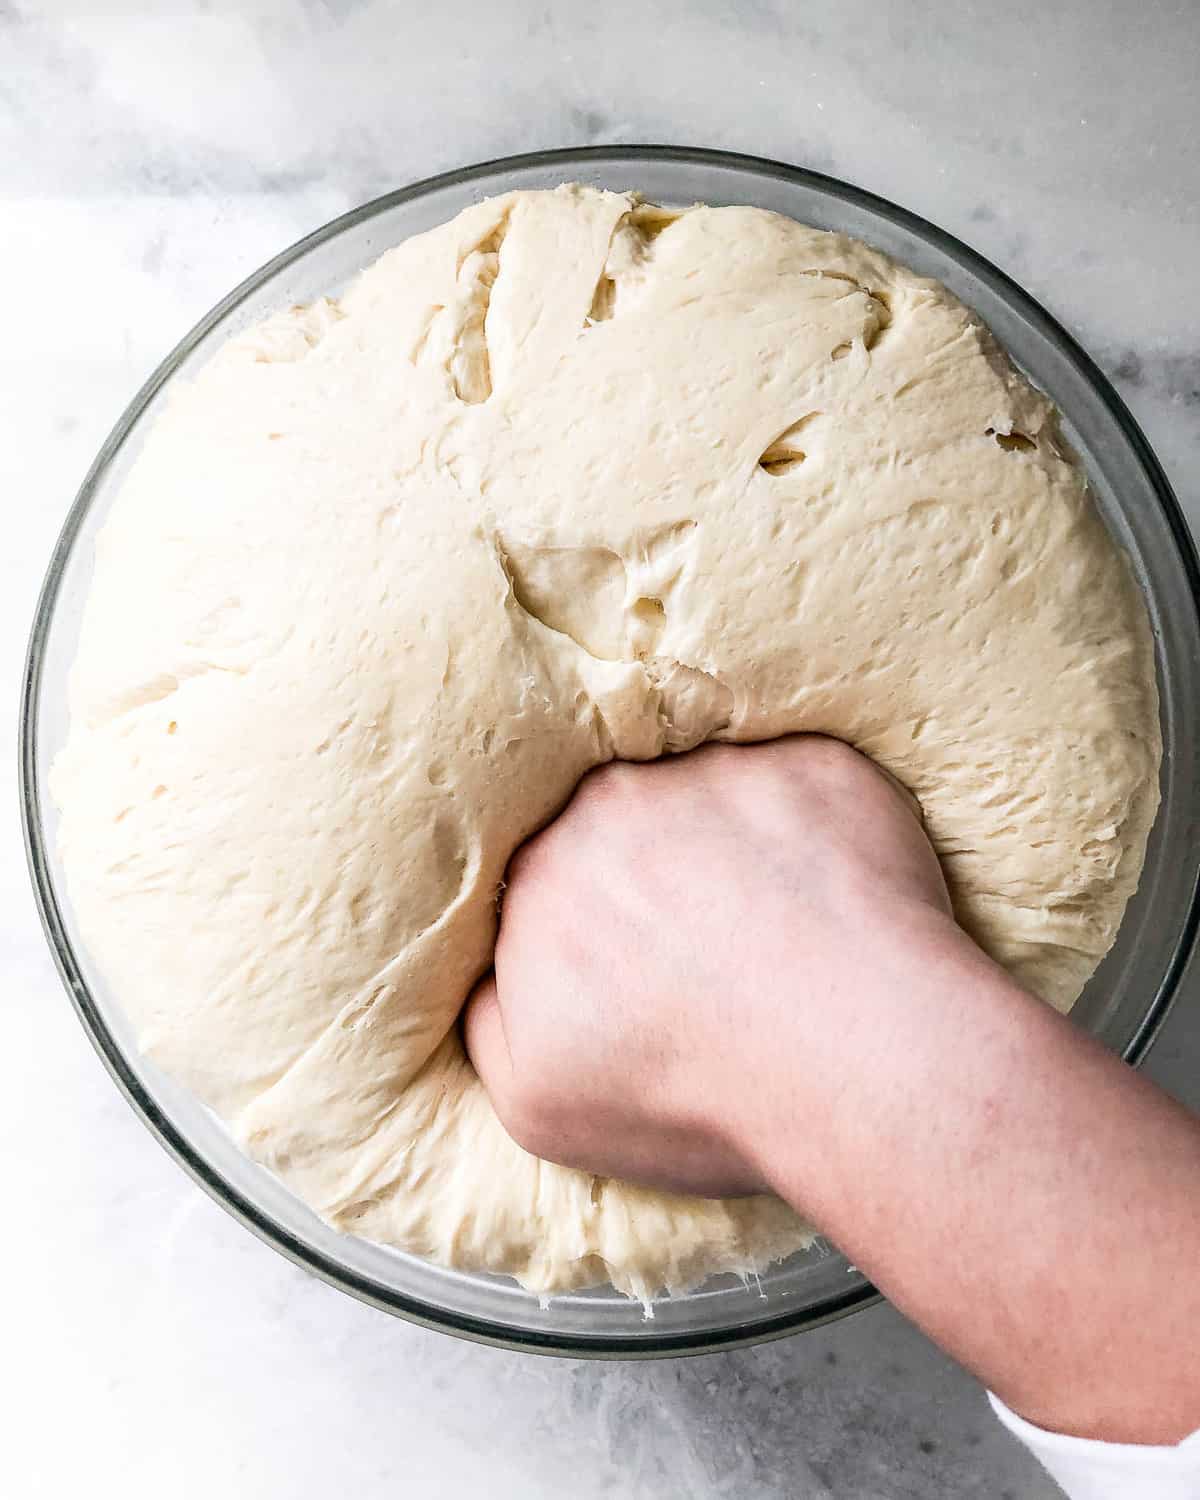 punch down the enriched dough